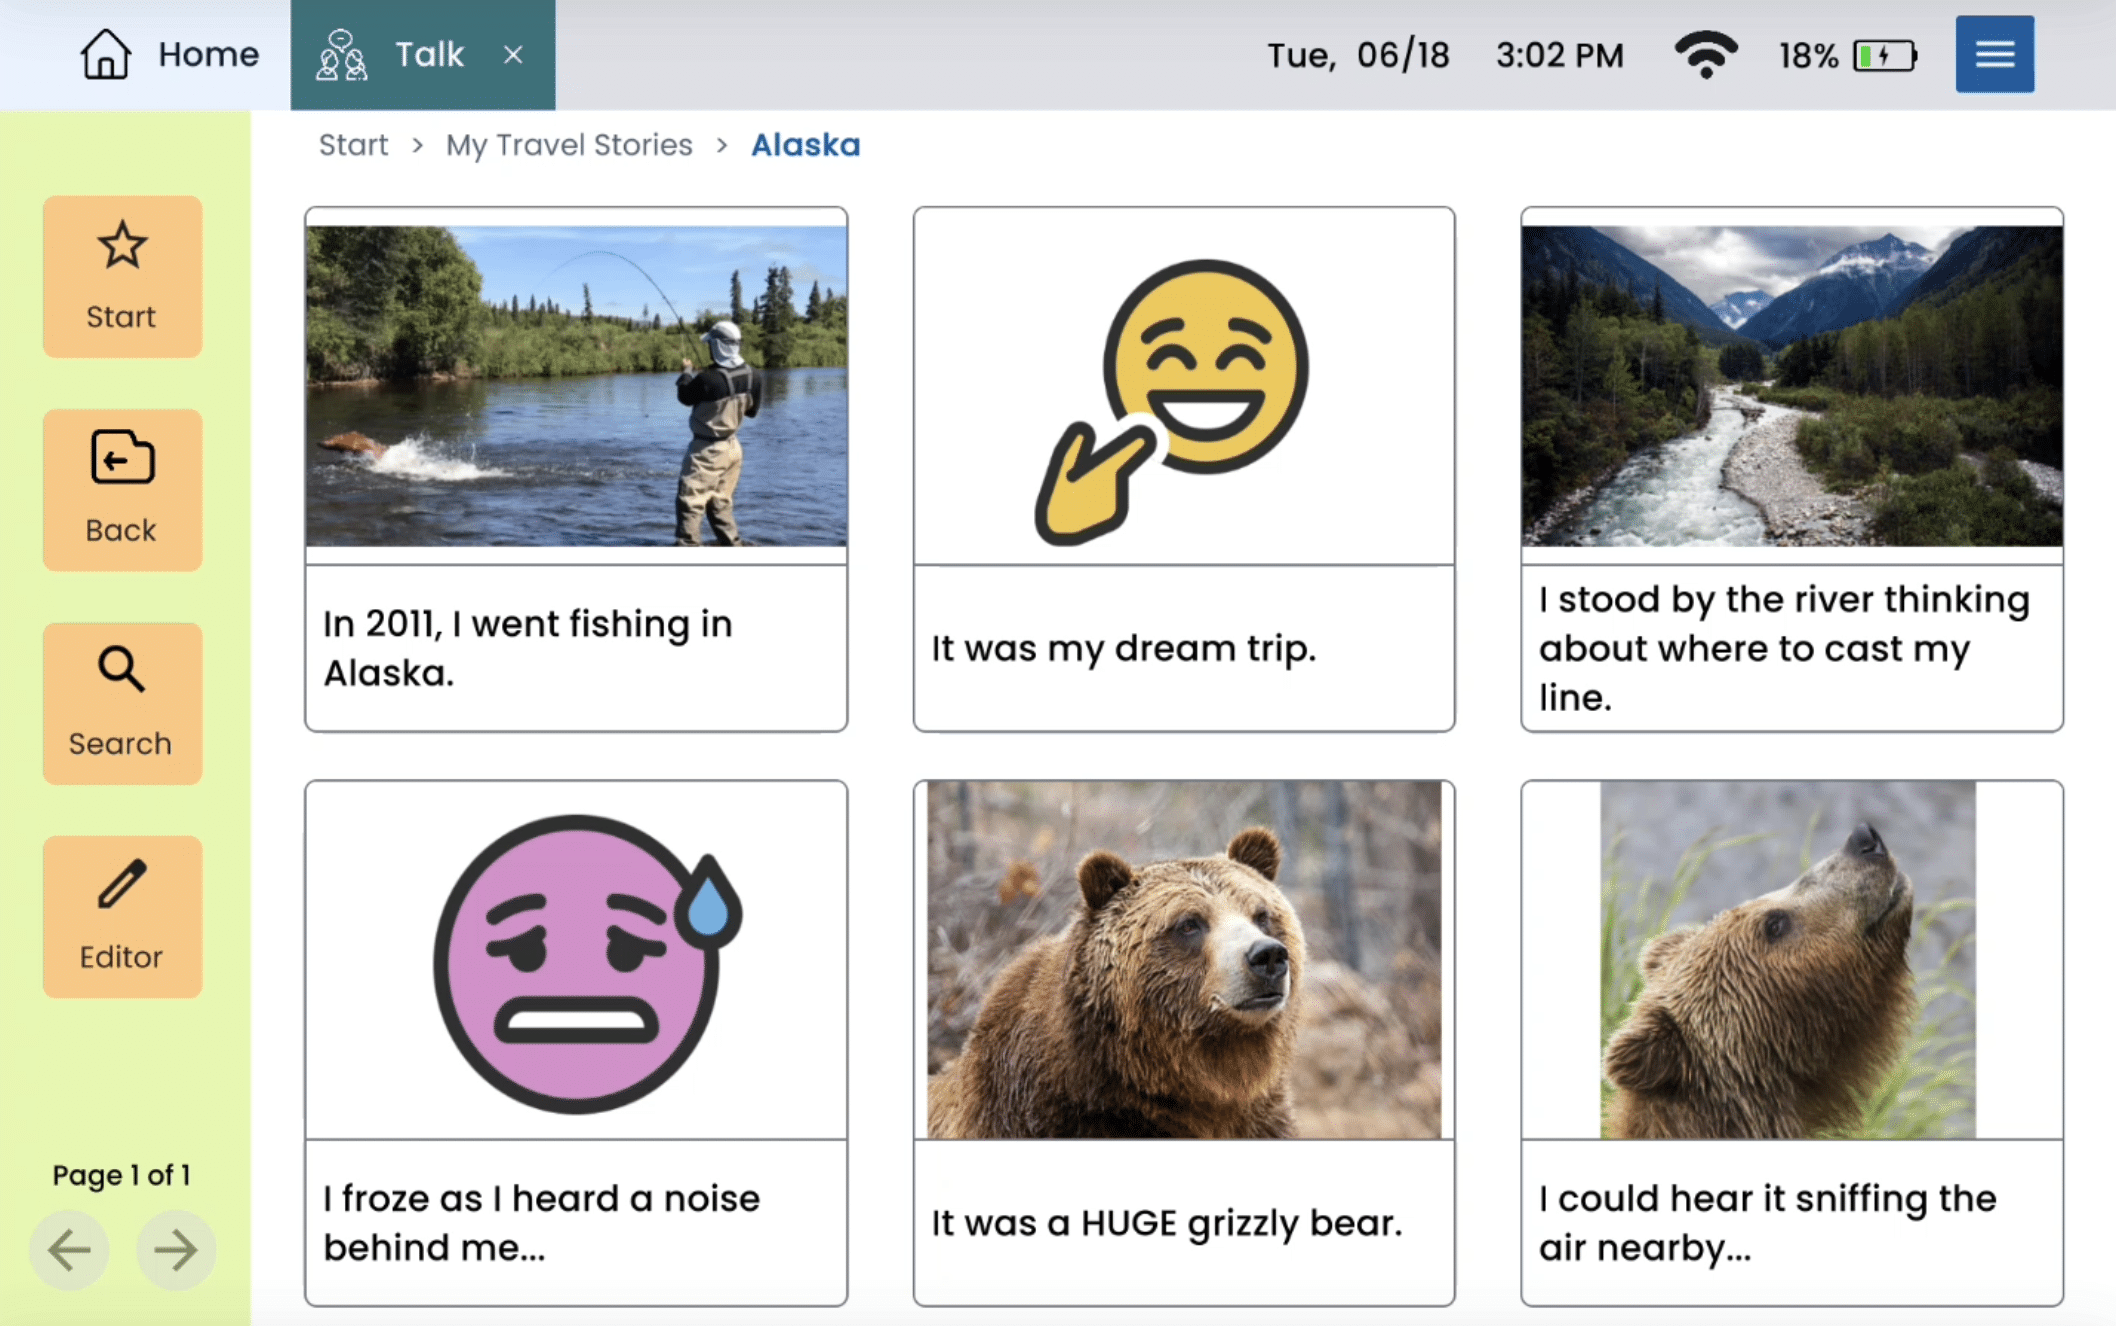 Screenshot of Bruce's AAC device showing his Alaska travel stories with images and captions about fishing and grizzly bears.